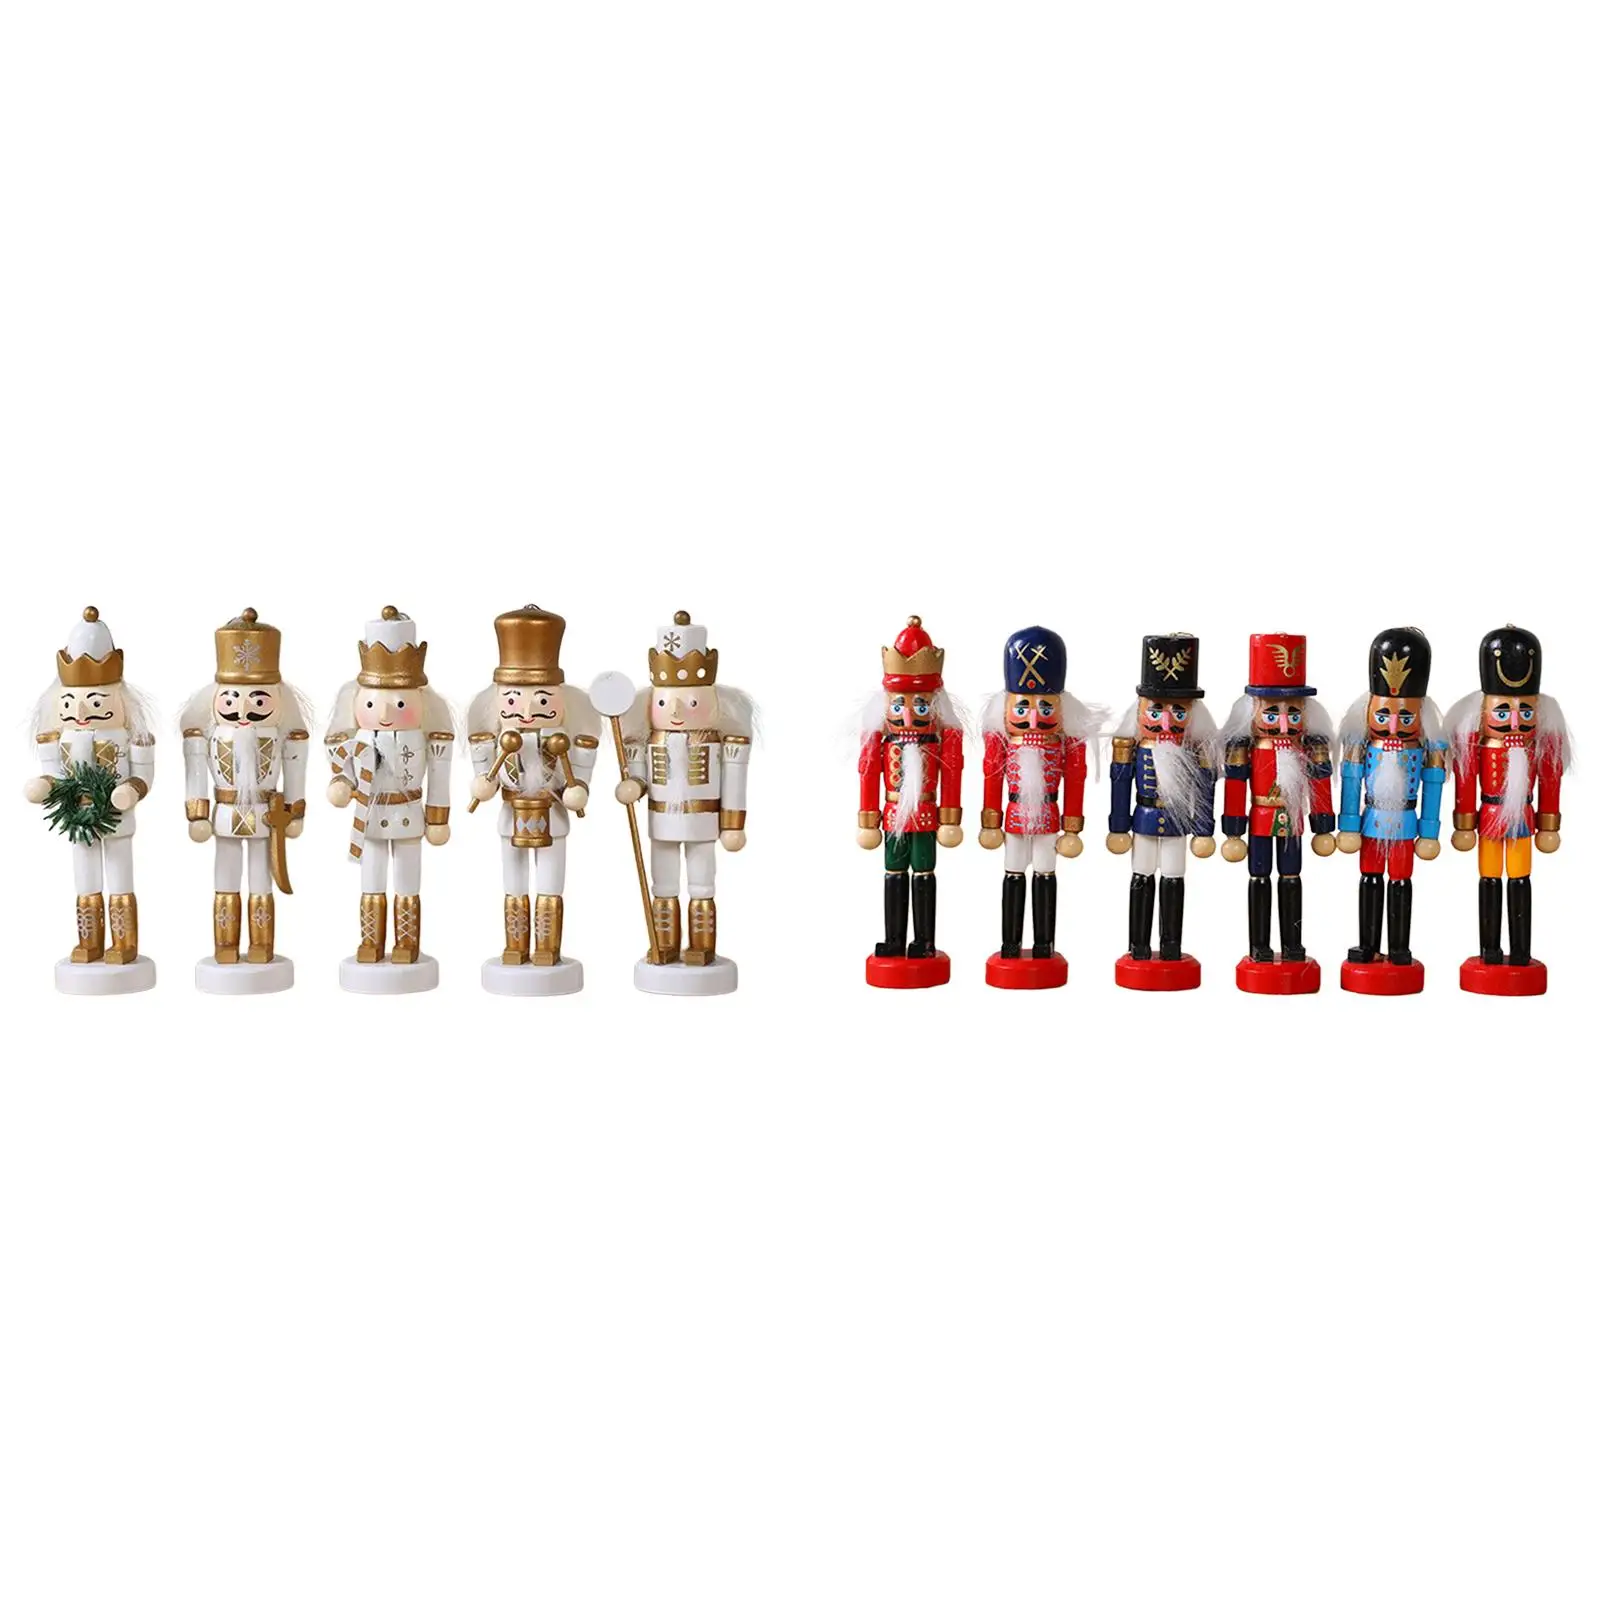 

Wooden Nutcracker Ornaments Holiday Present Collections Multifunctional Classic Style Stable Base Kids Toys Decorative Figures